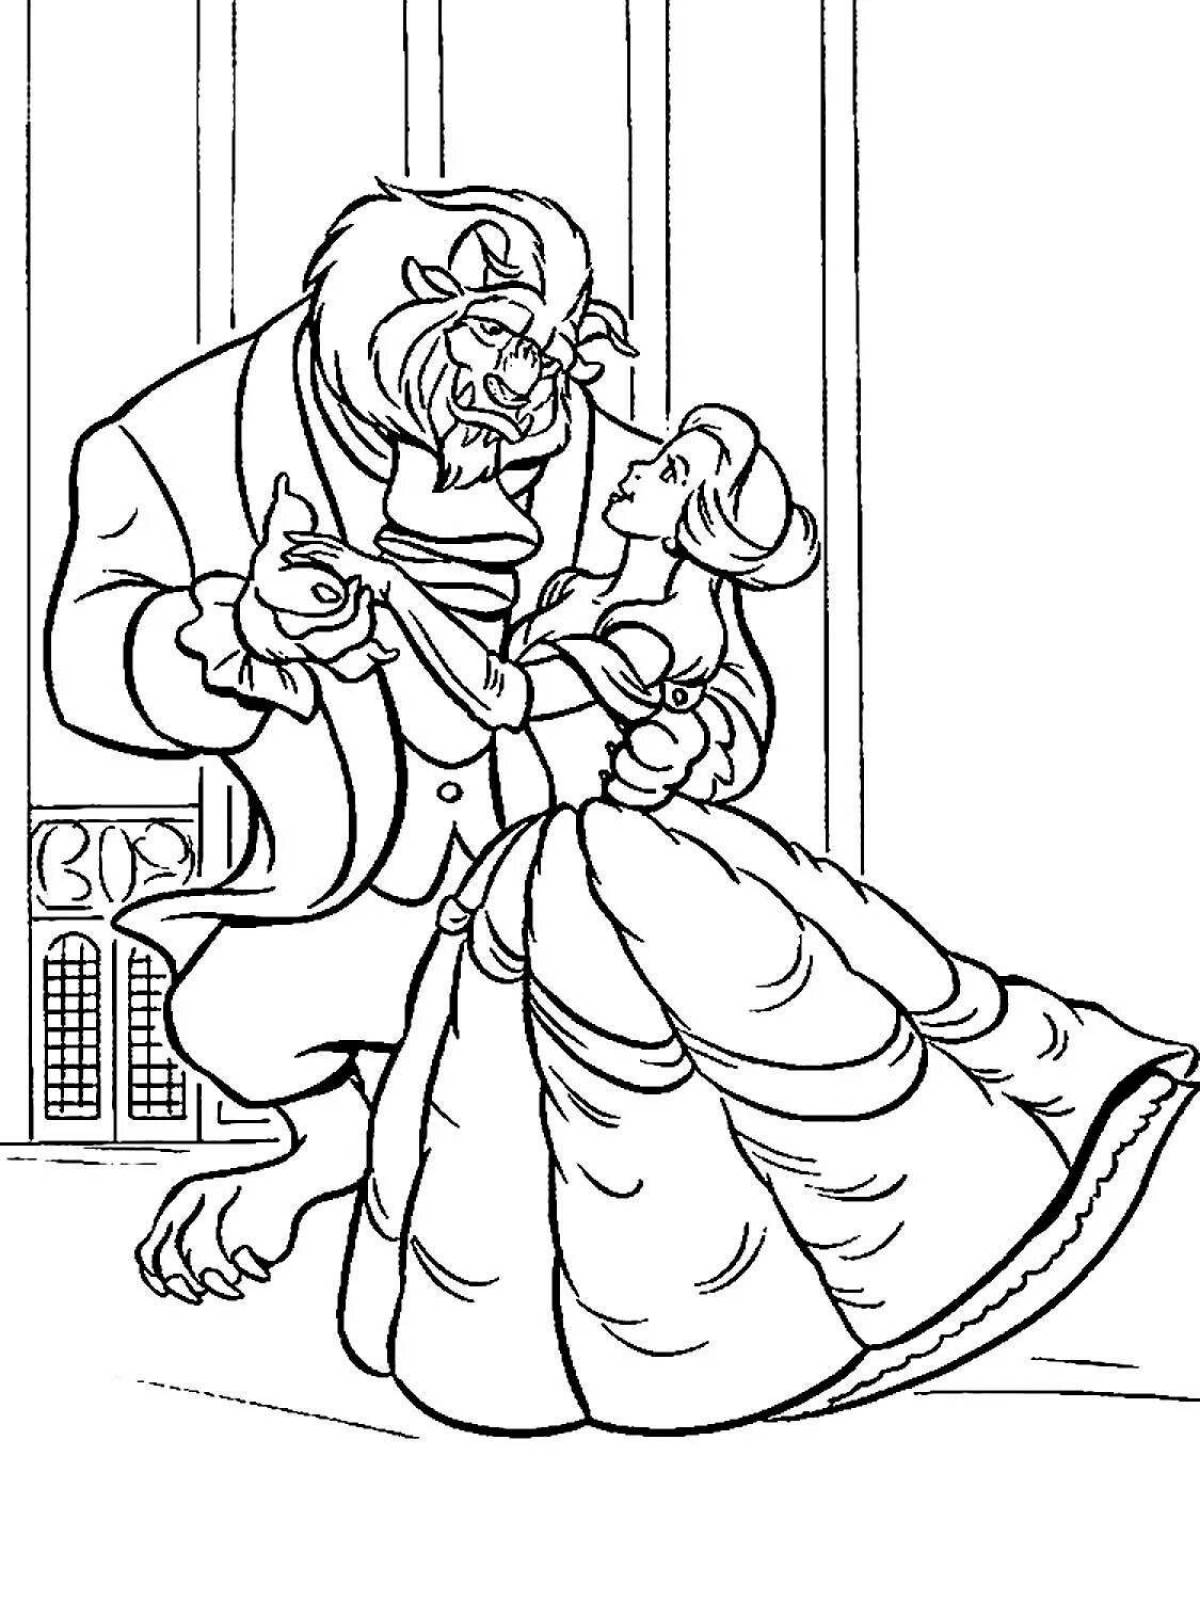 Beautiful beauty and the beast coloring pages for kids